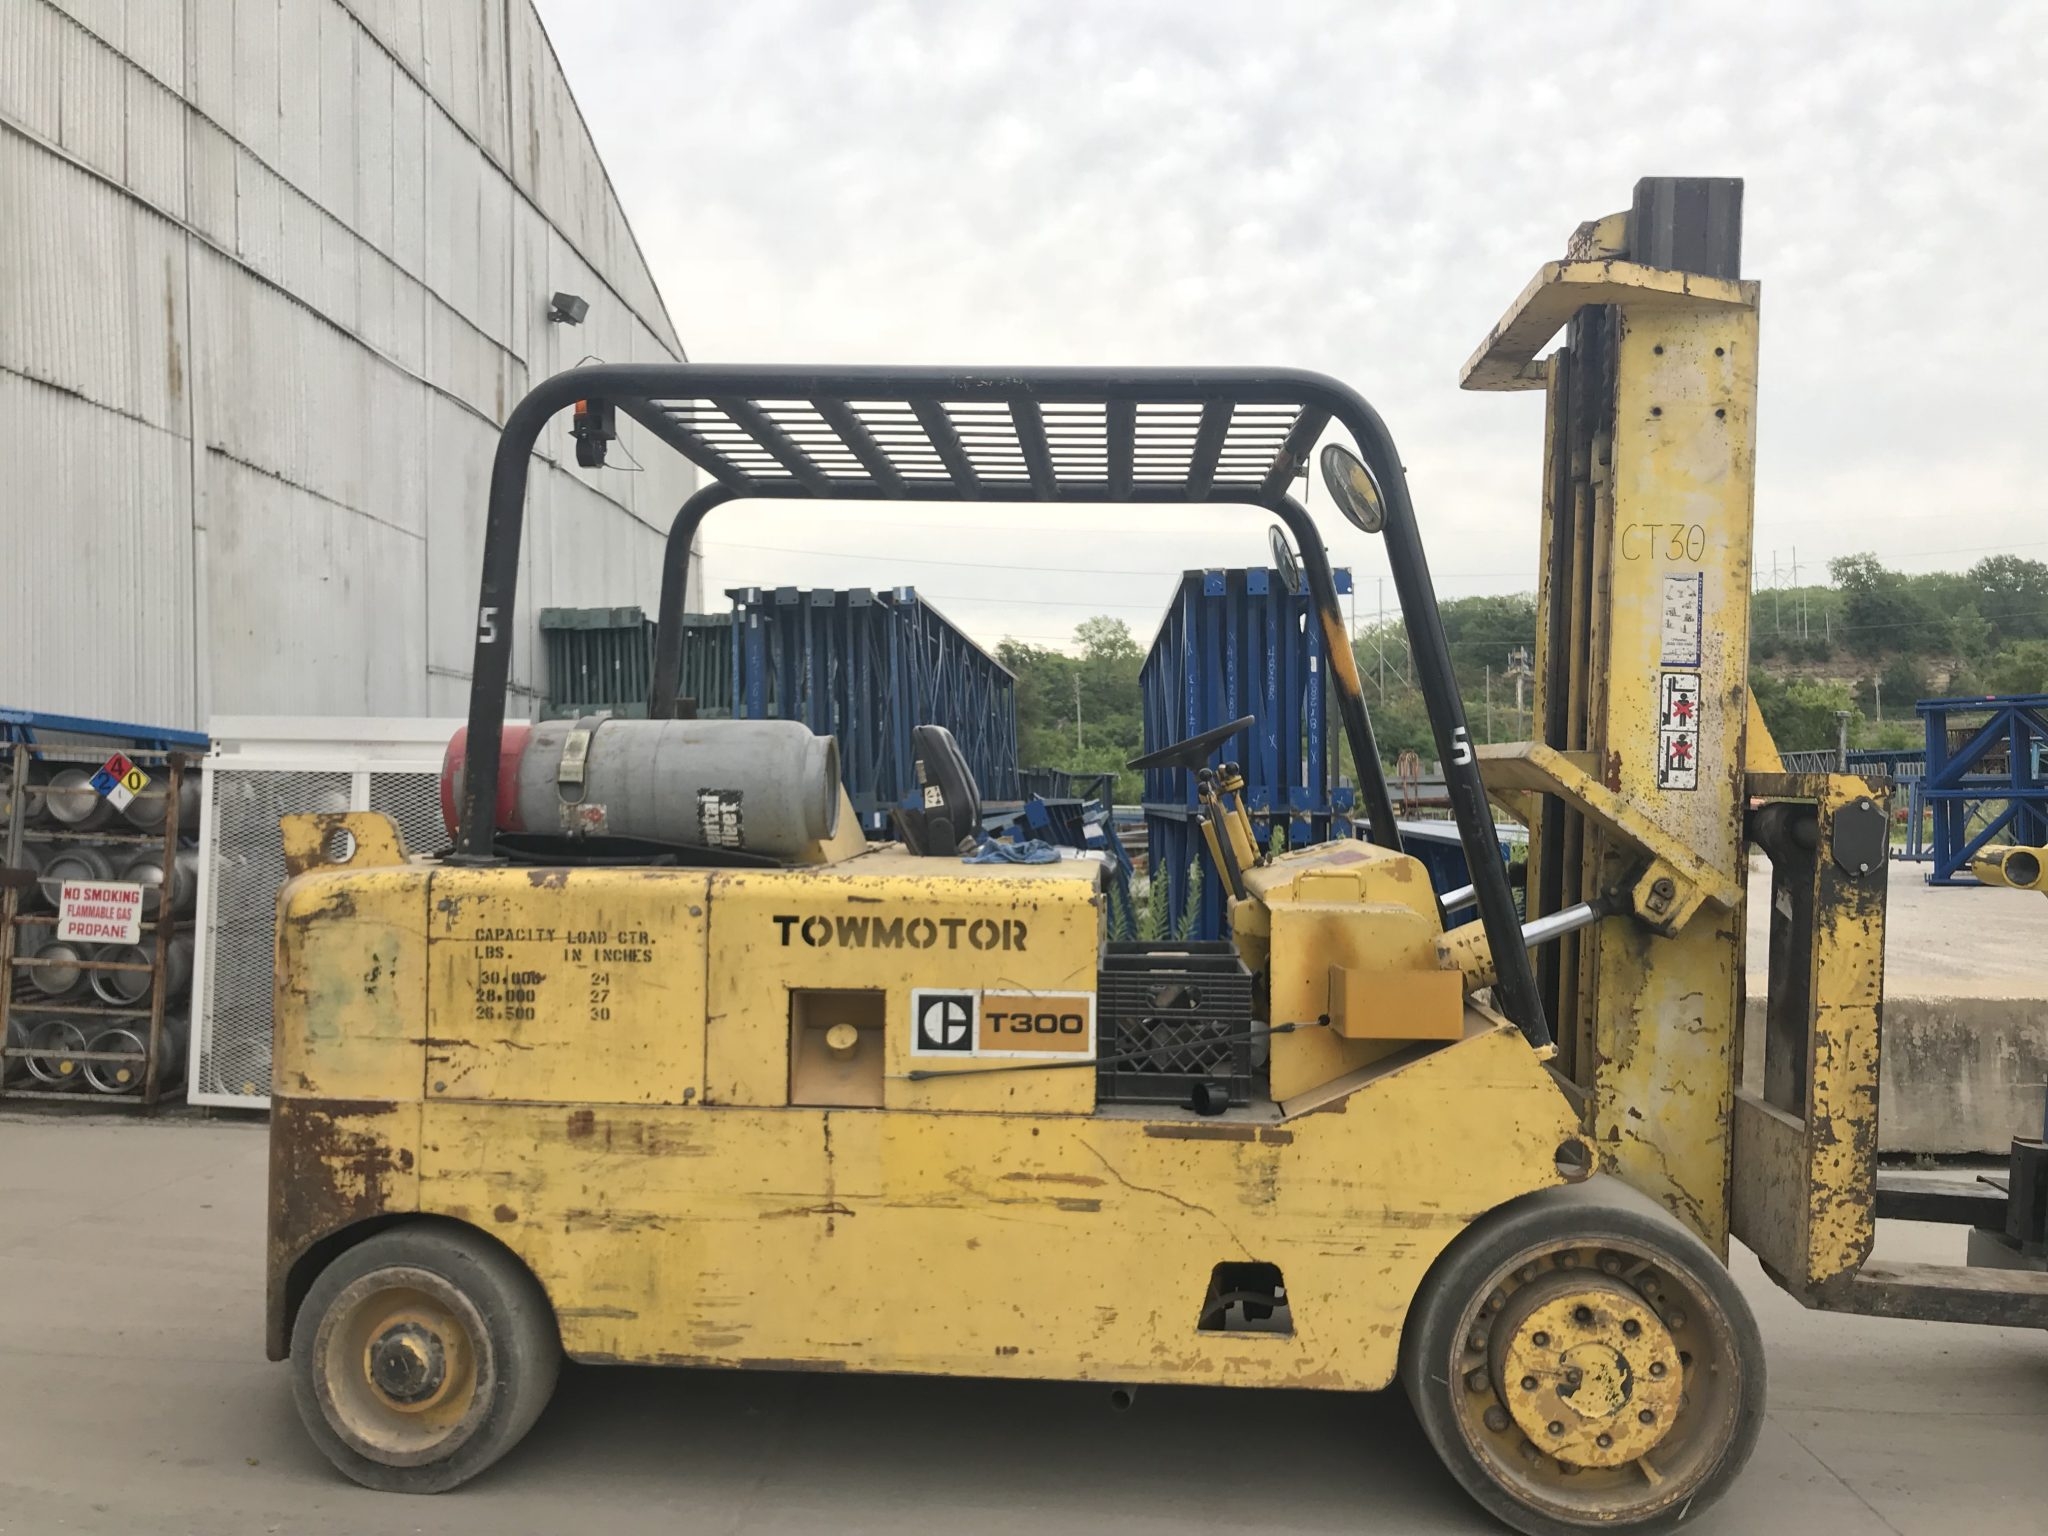 30 000 Lb Capacity Cat T300 Forklift For Sale 15 Ton Call 616 200 4308affordable Machinery